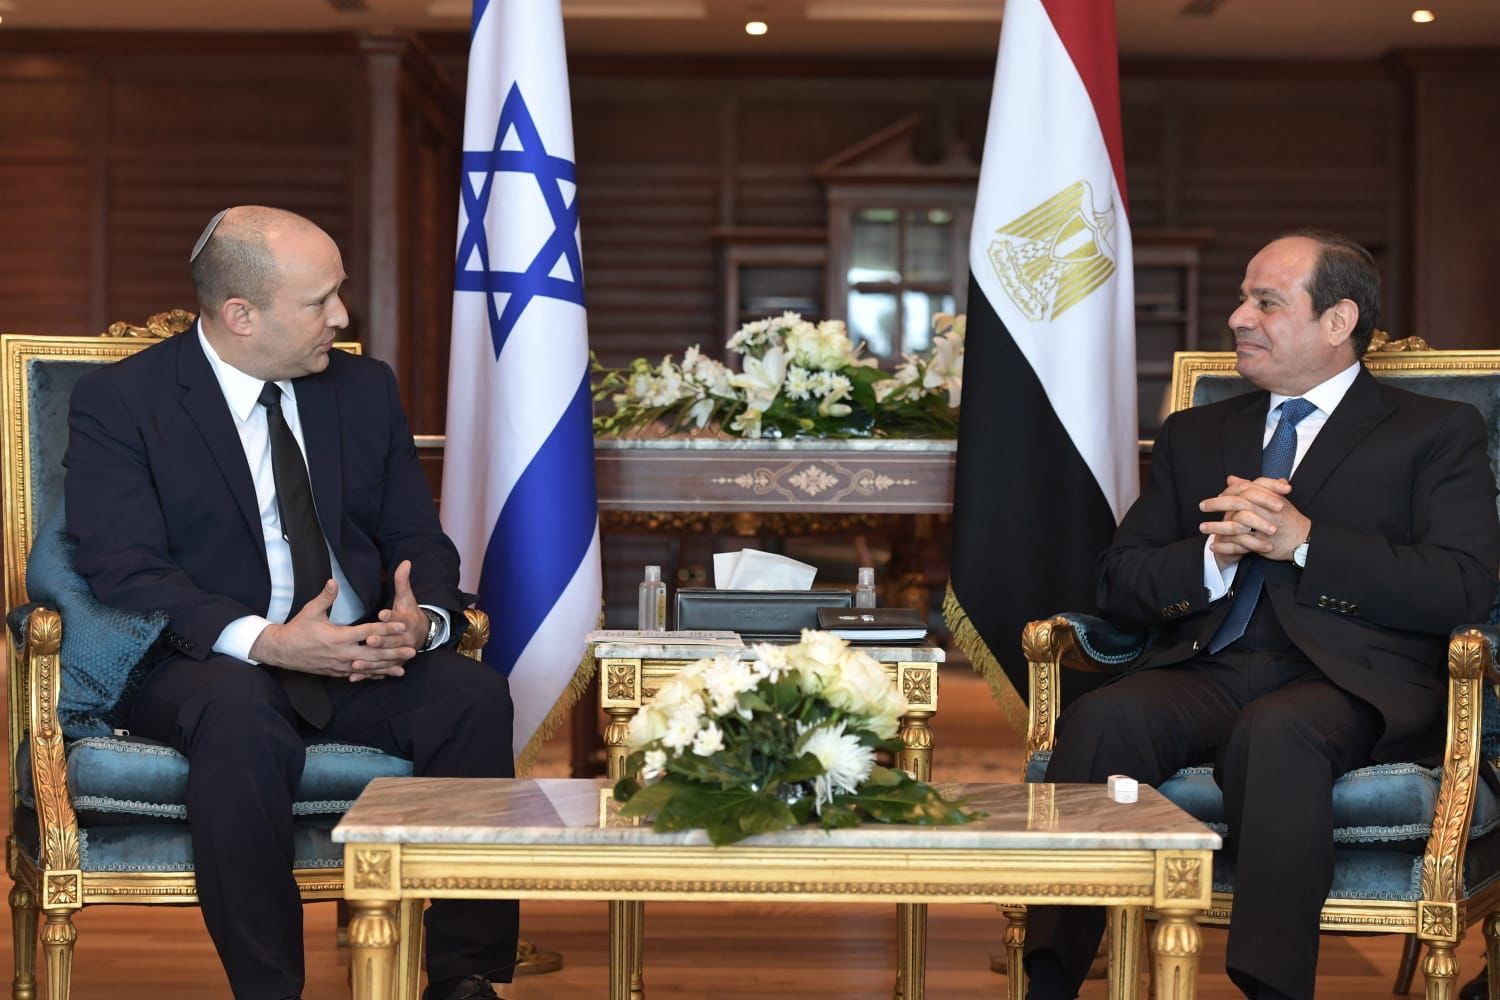 Bennett Meets Sisi In First Egypt Visit By An Israeli PM Since 2011 - I24NEWS